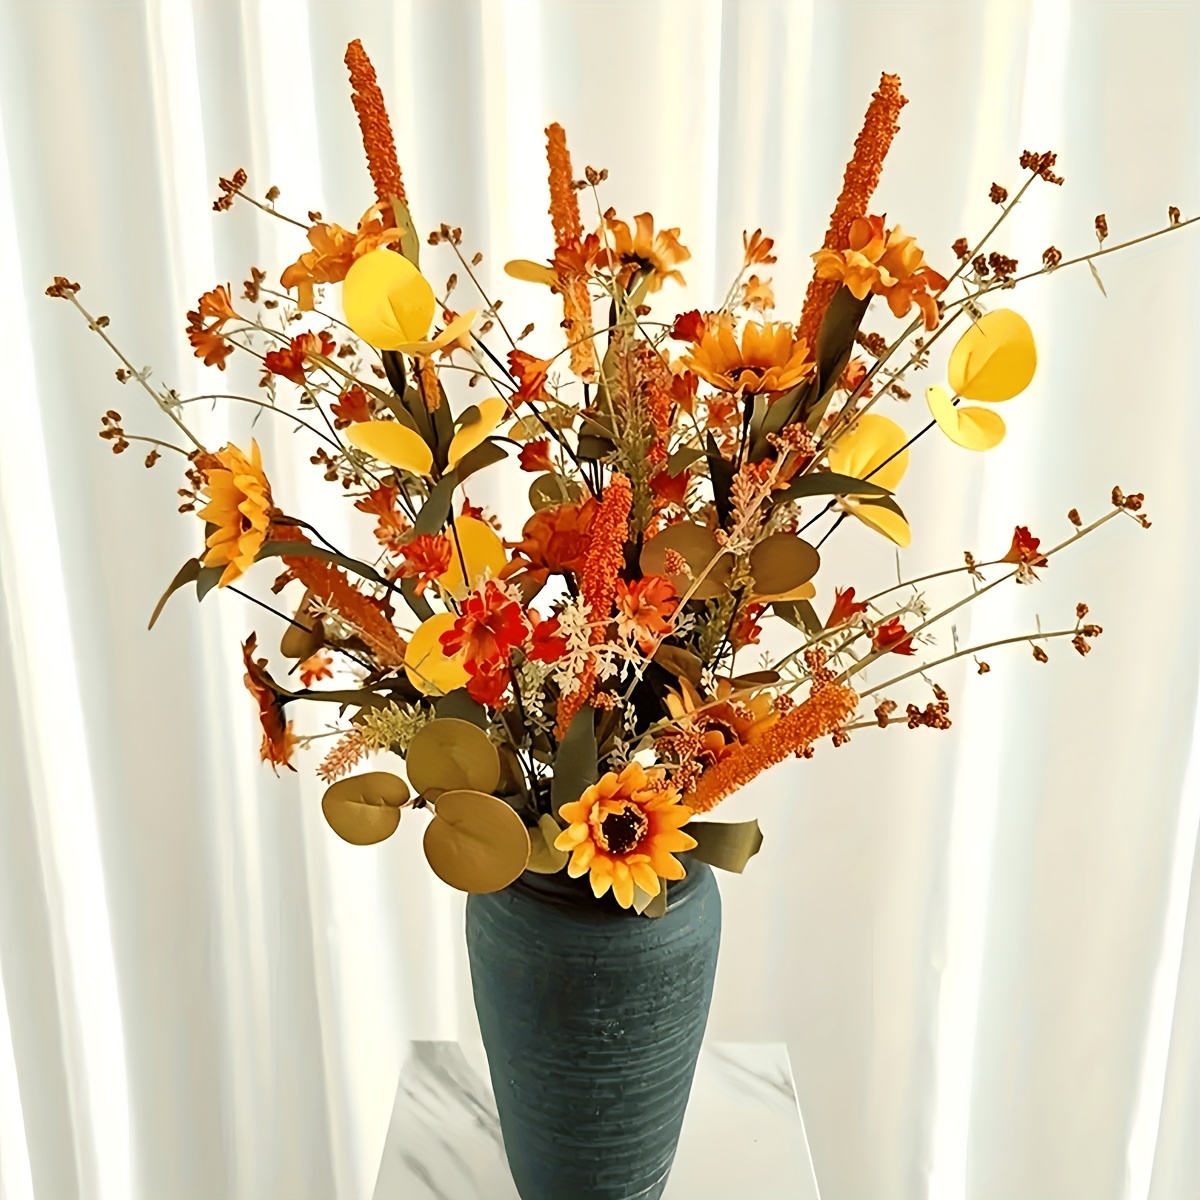 

2 Pack Fall Flowers Bouquets - 21.7" Artificial Autumn Floral Arrangements, Freestanding Plastic Decor For Thanksgiving, Halloween, Graduation, Indoor & Outdoor Use Without Electricity - No Feathers